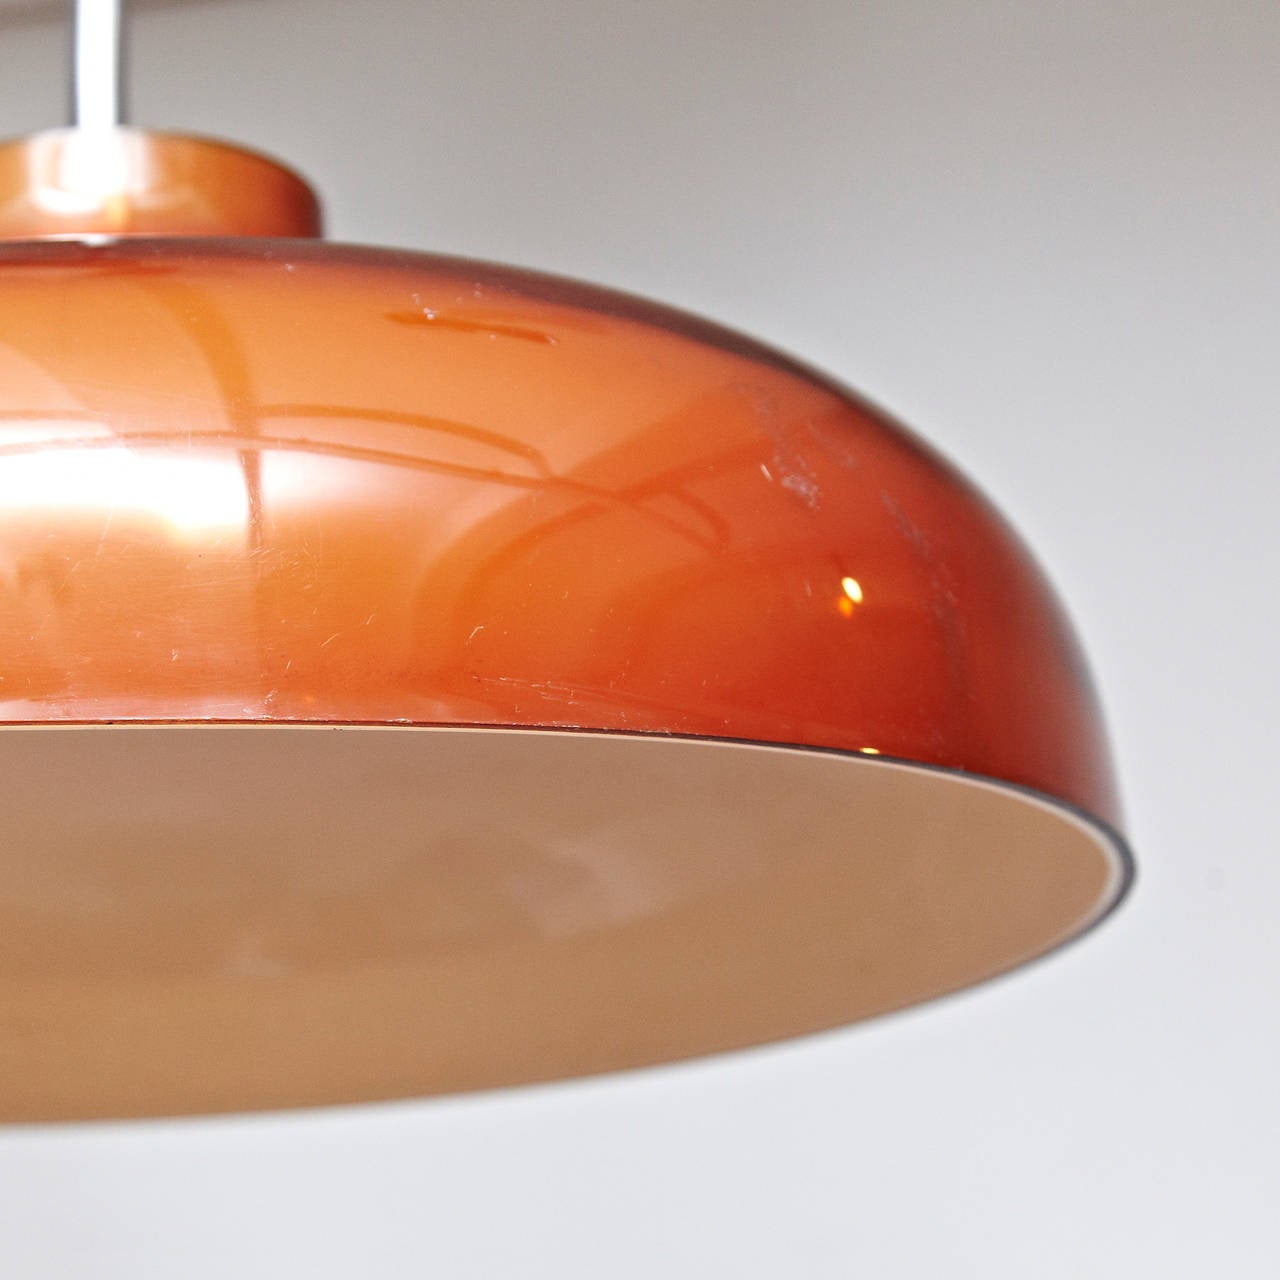 Lamp designed by Miguel Milá, circa 1950.
Manufactured by Tramo (Spain).

In good original condition, with minor wear consistent with age and use.

Miguel Milá represents like no other person Spanish contemporary design. He belongs to the